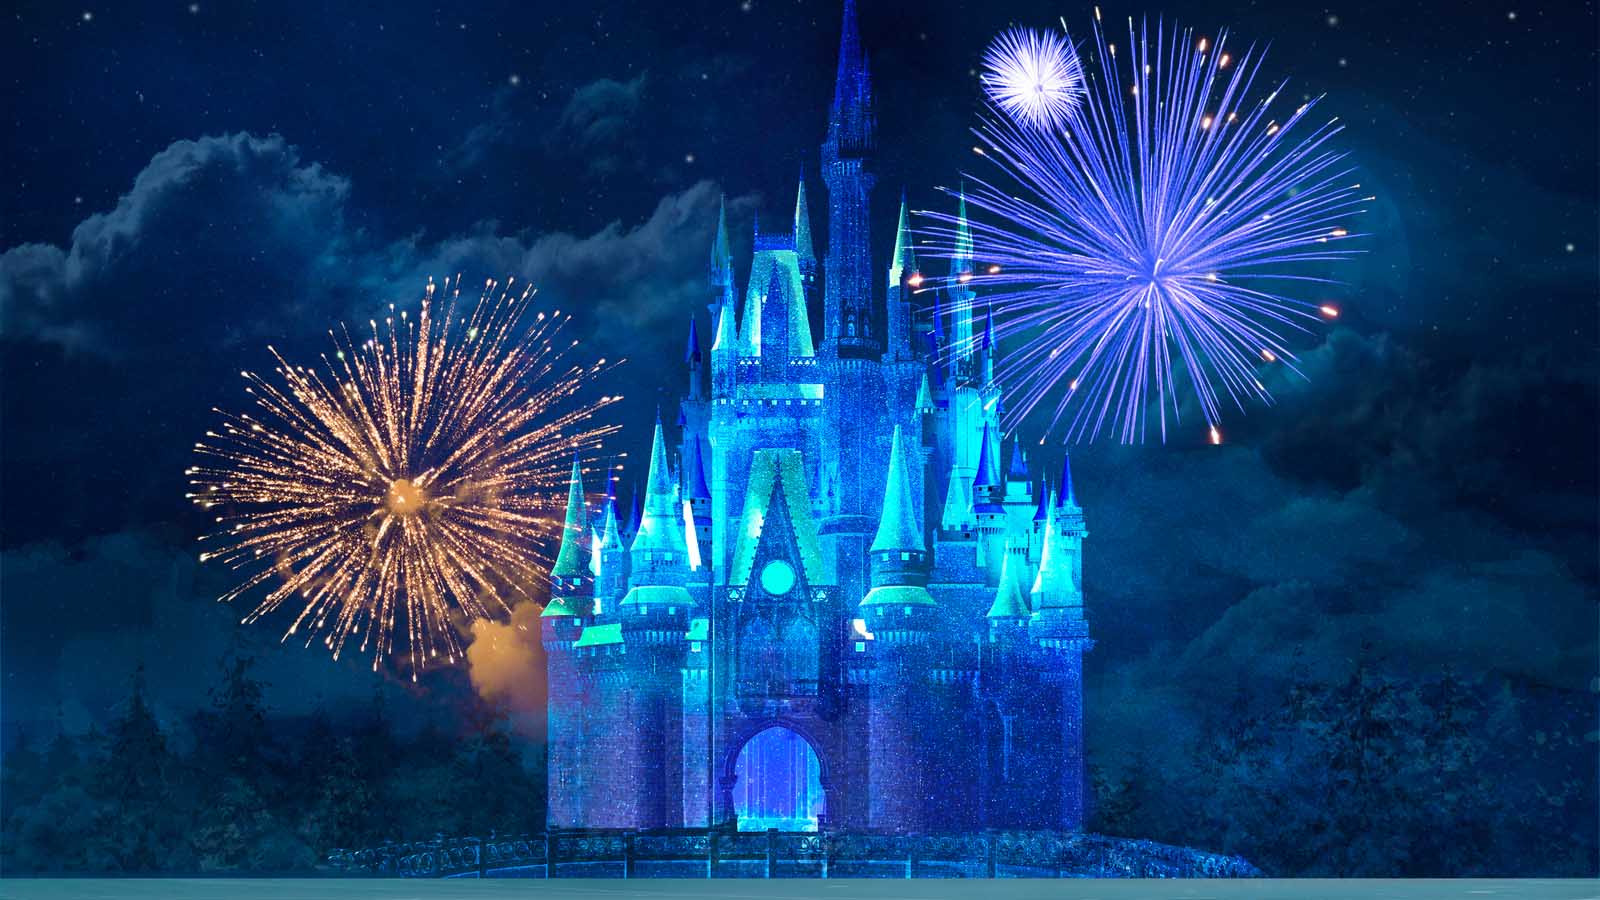 Disney (DIS stock): An illustration of the magical kingdom castle at night with fireworks behind it